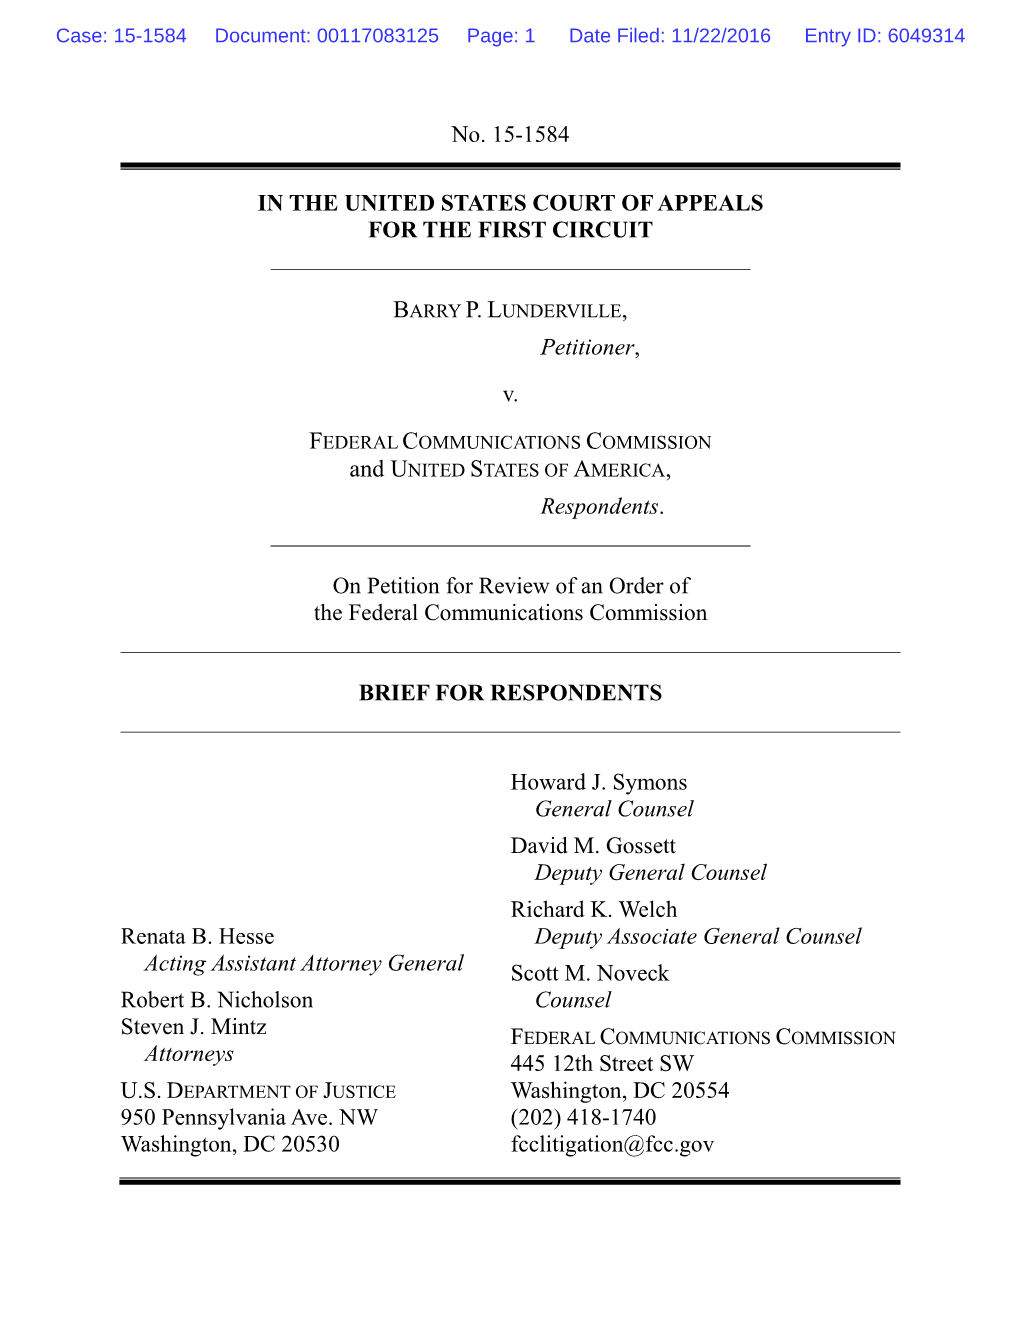 Brief for Respondents, Lunderville V. FCC & USA, No. 15-1584